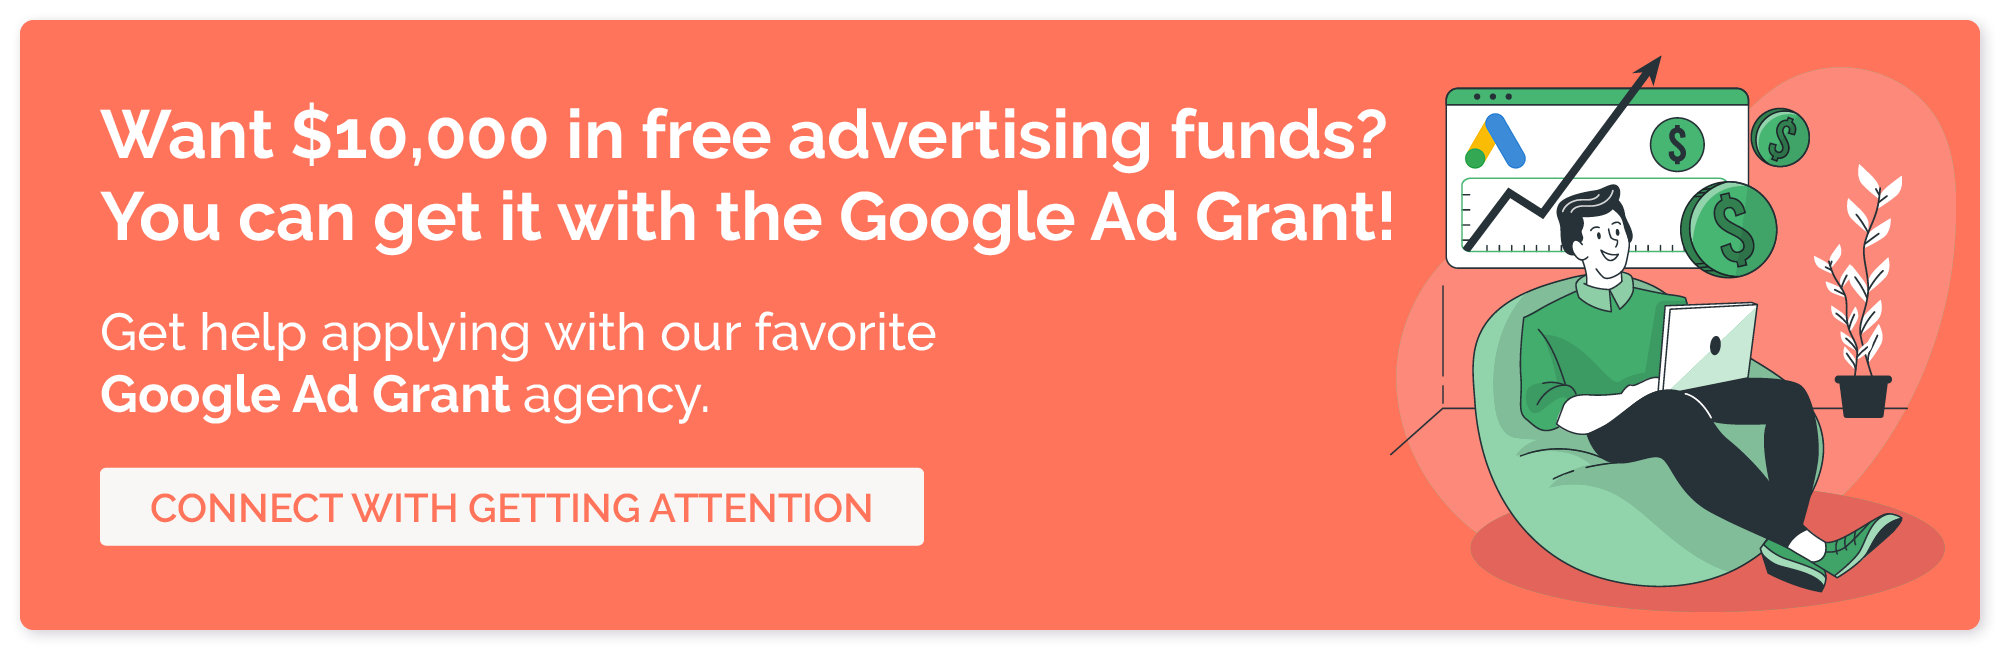 Want $10,000 in free advertising funds? You can get it with the Google Ad Grant! Get help applying with our favorite Google Ad Grant agency. Connect with Getting Attention.